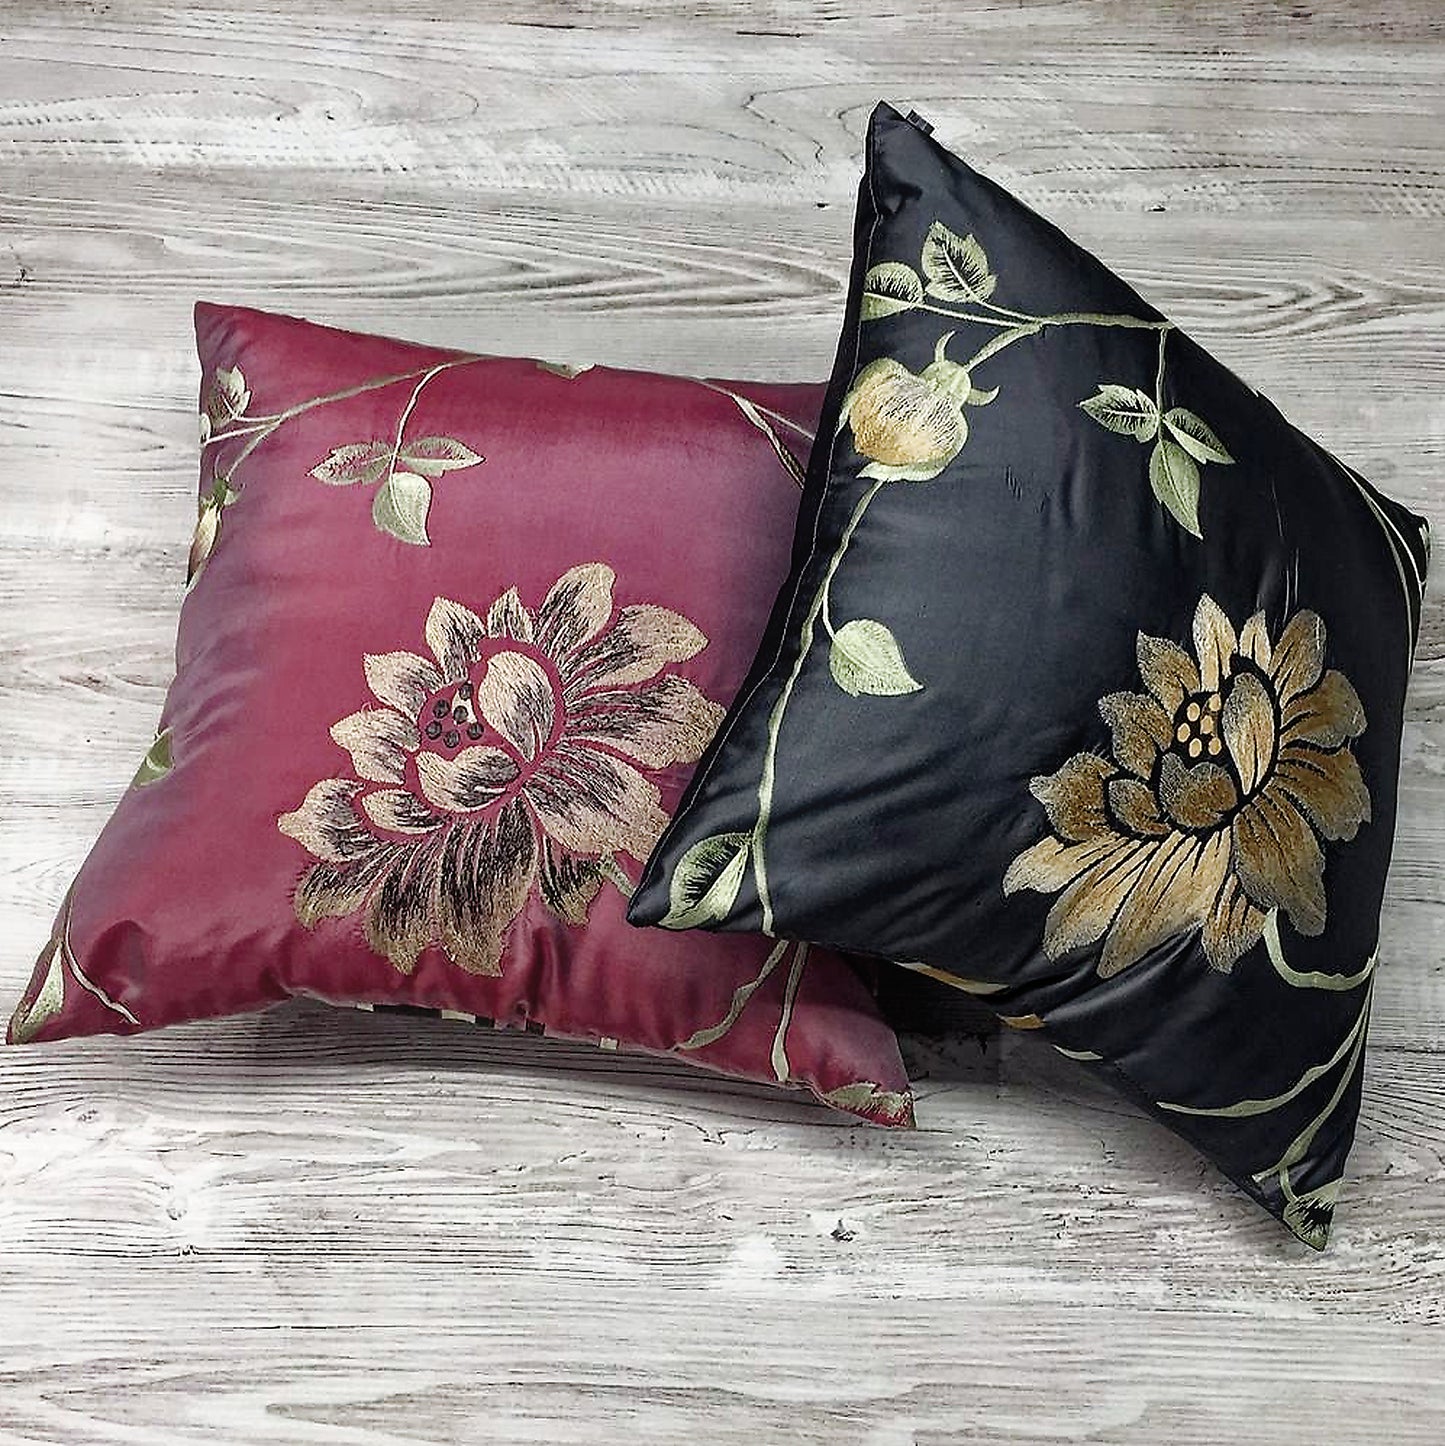 Luxury cushion collection "Victoria & Abdul" Set of 2 cushions